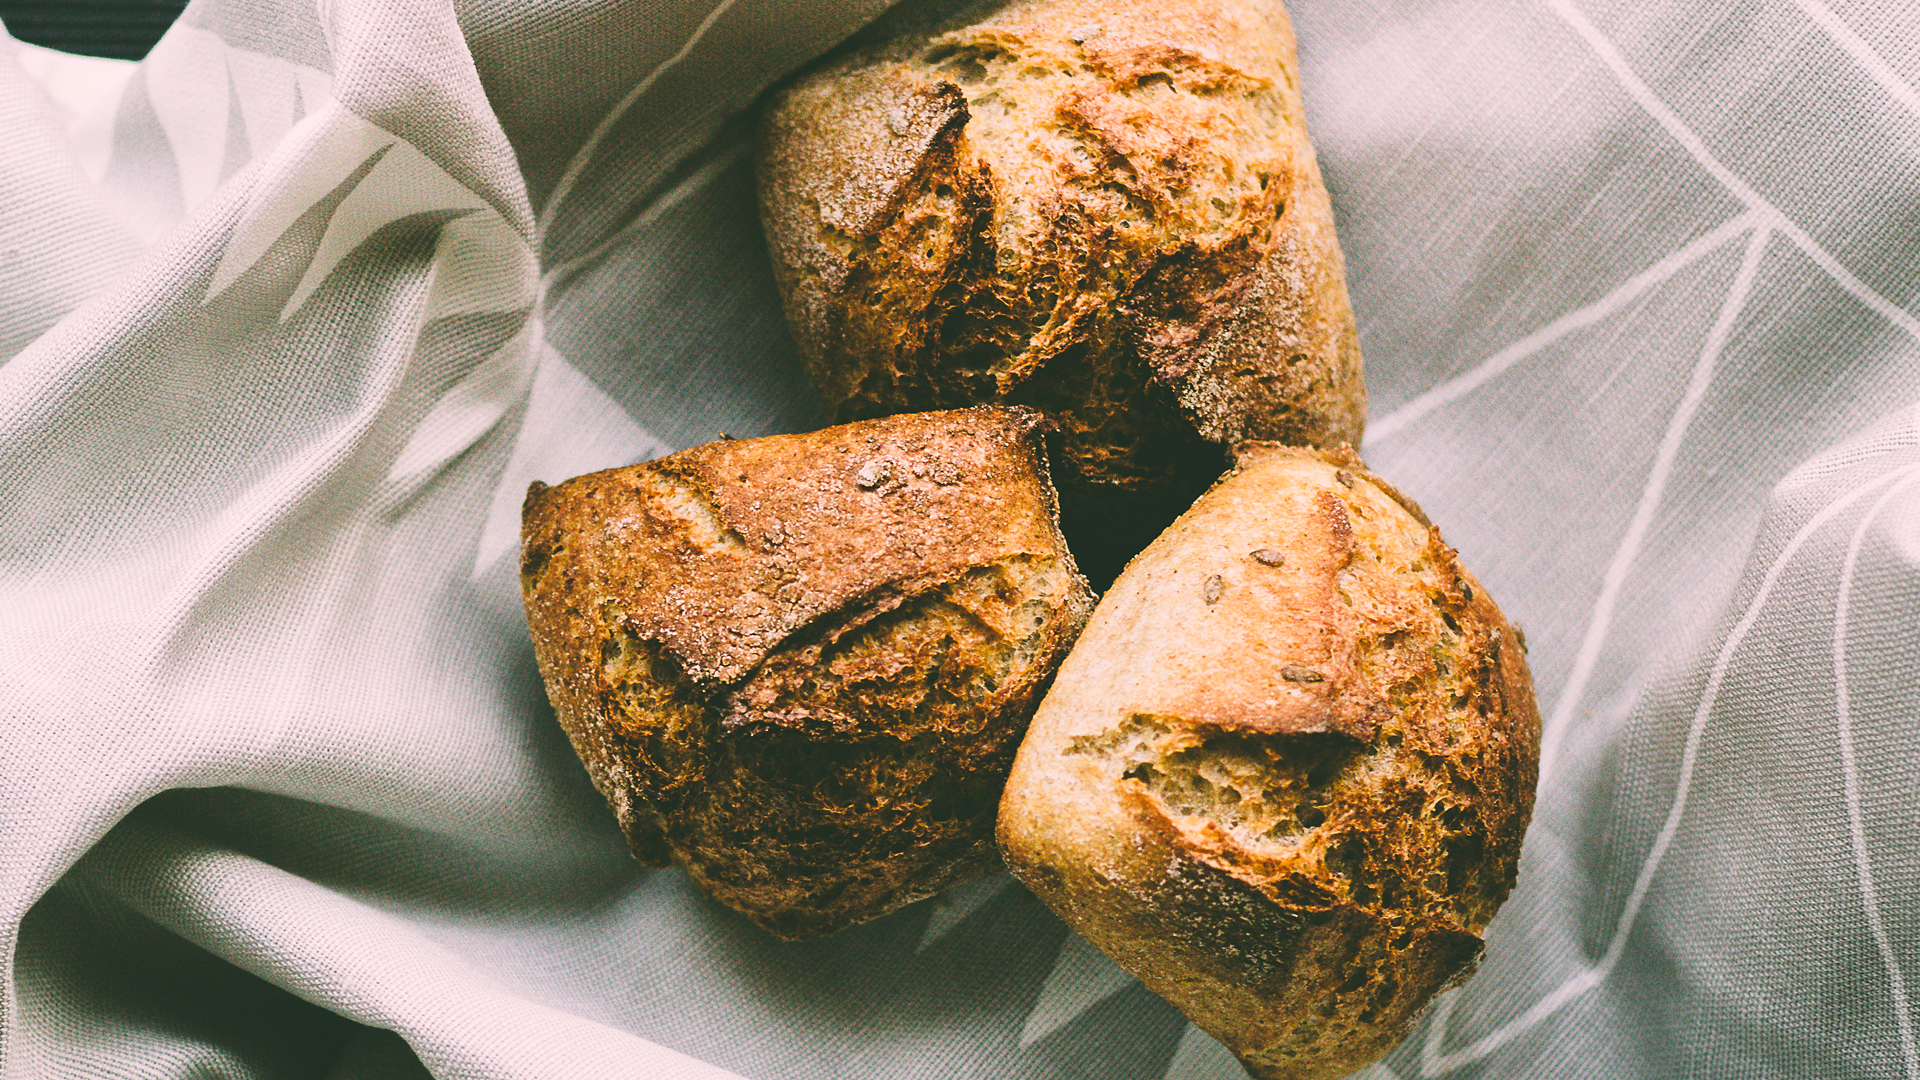 Fresh from the oven, this gluten-free bread recipe is the simplest you’ll find.